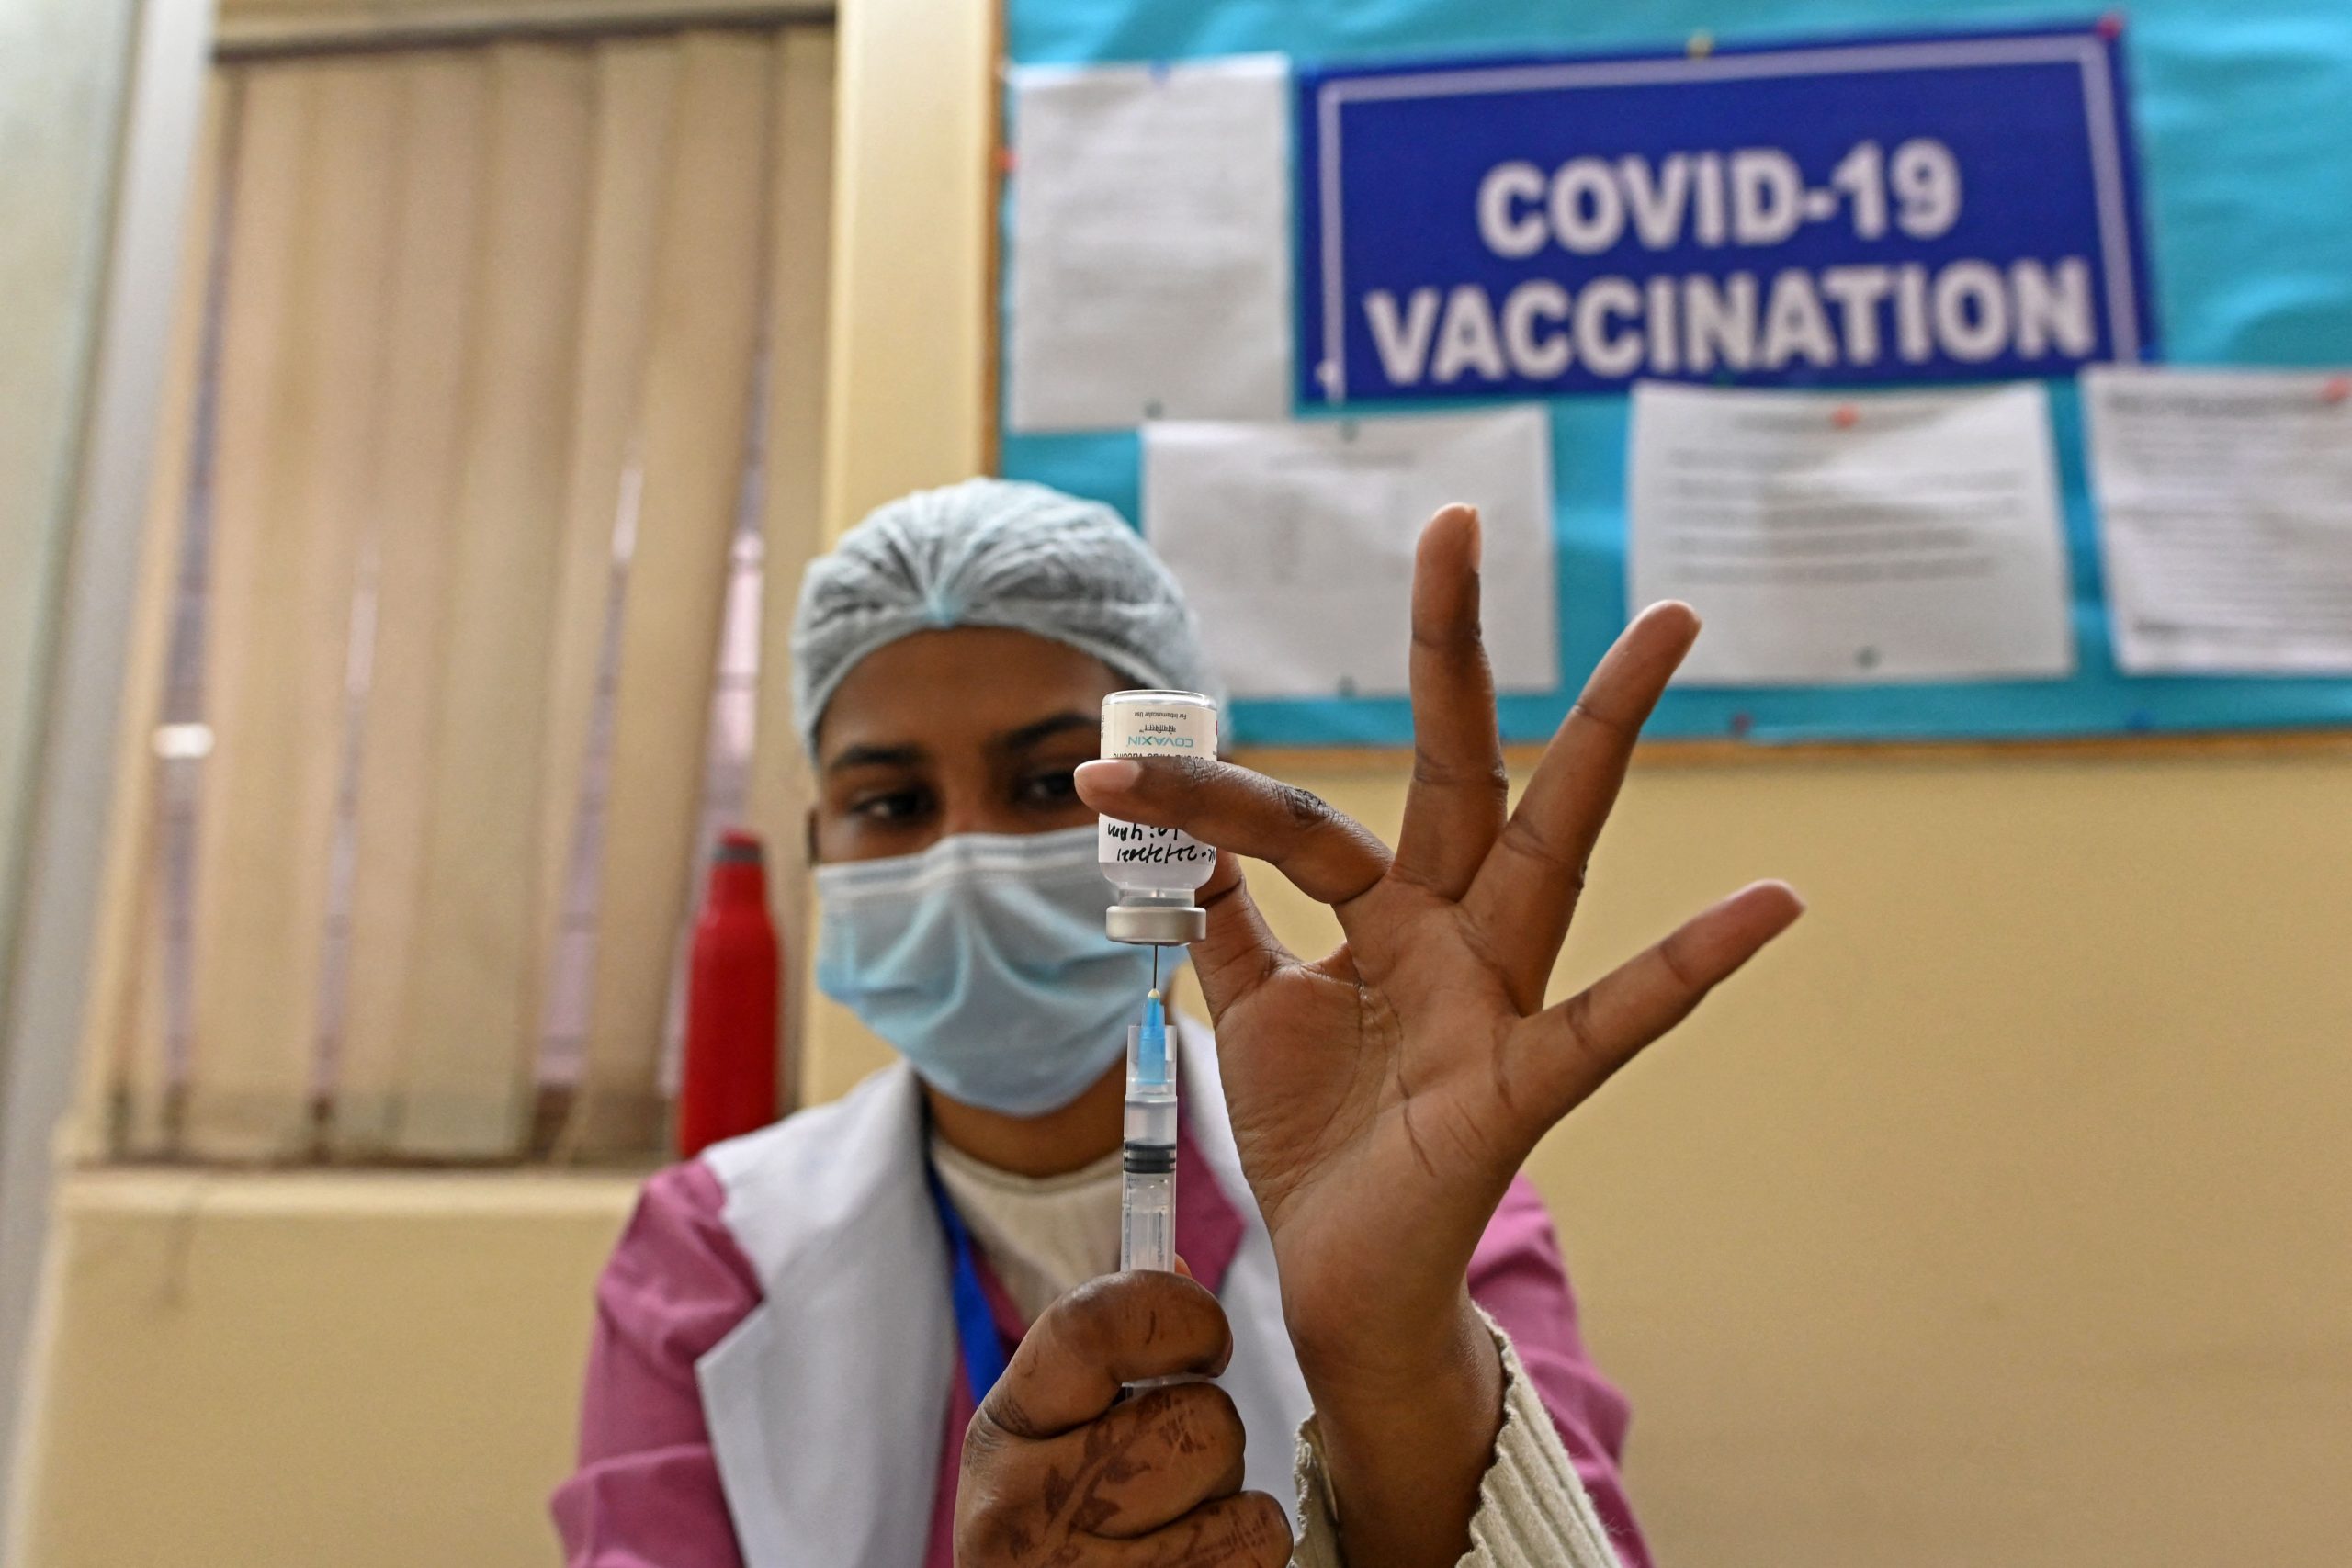 Quad summit: With eyes on China, US and allies launch vaccine plan